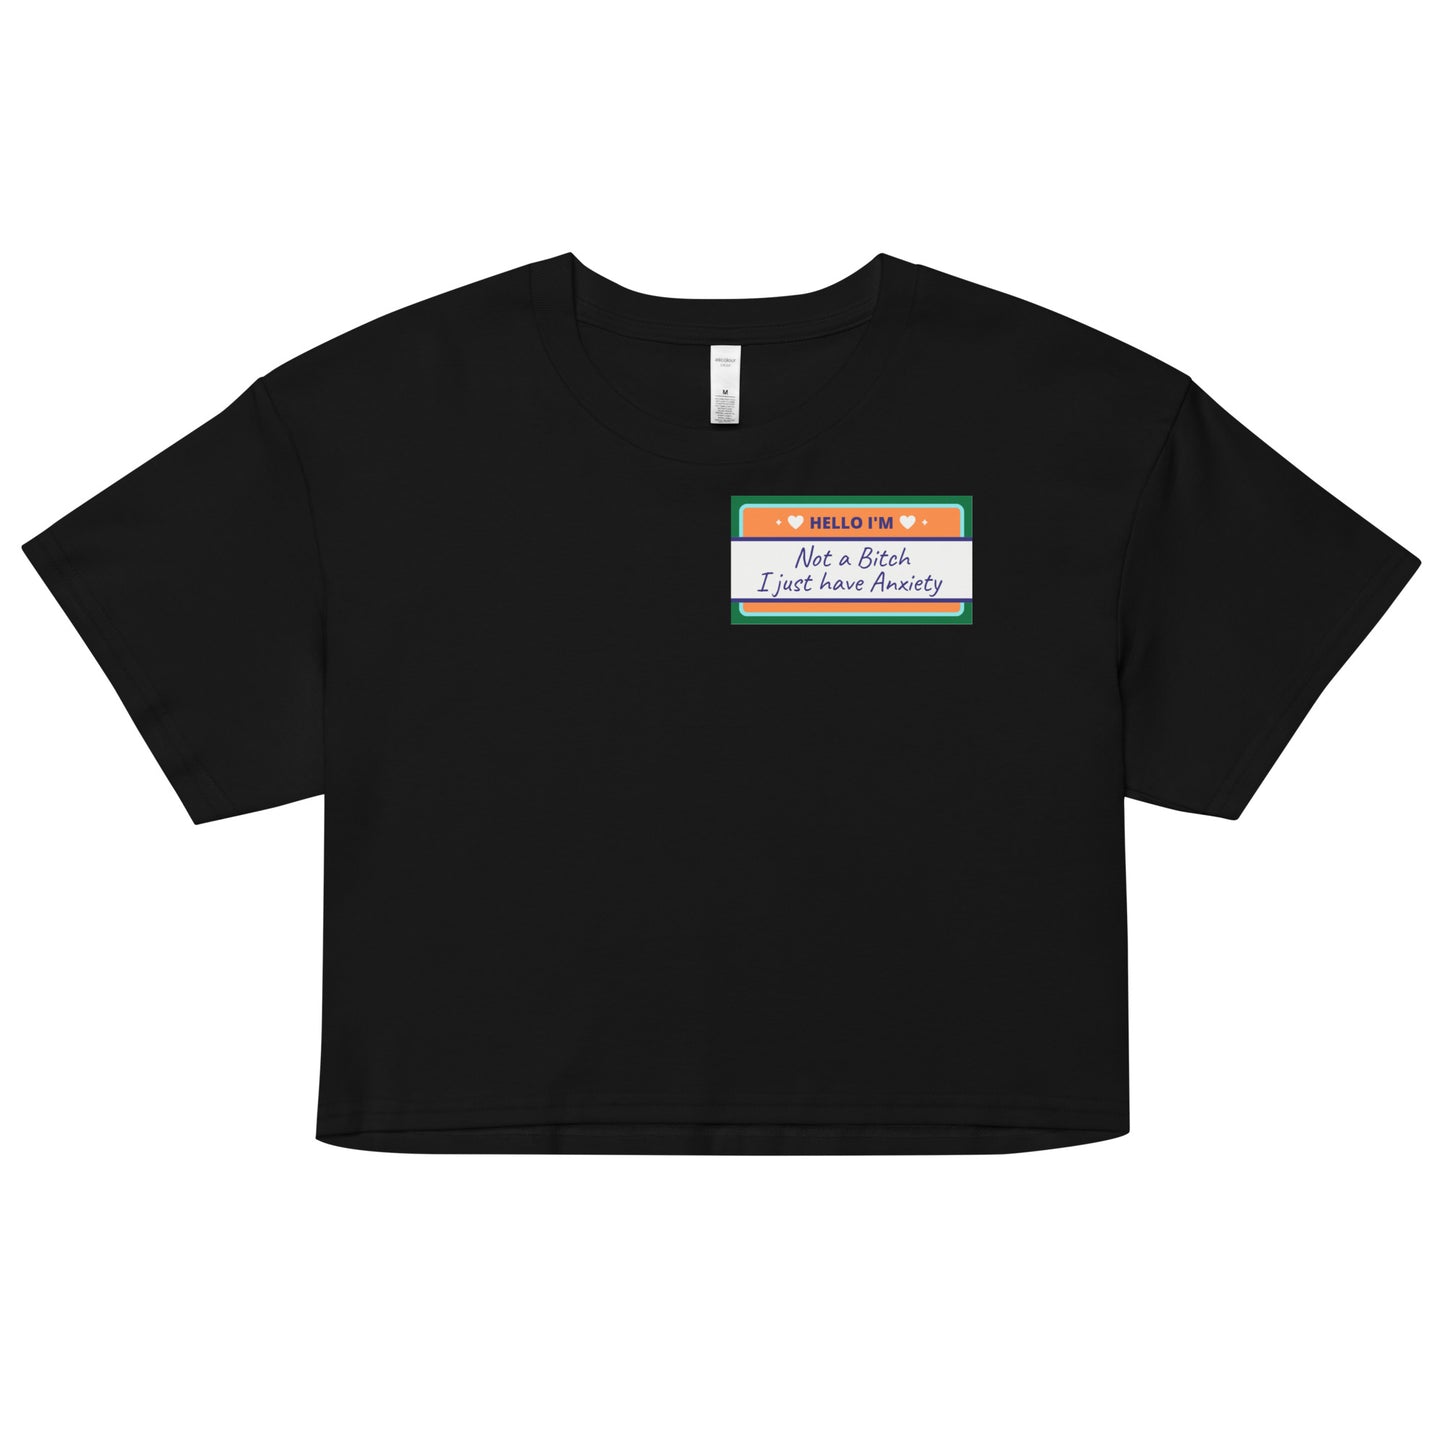 Not a B*tch. I have Anxiety Women’s crop topThis crop top is made of 100% combed cotton, which makes the shirt extremely soft and more durable than regular cotton shirts. The relaxed fit and dropped shoulders Witchin Waifu